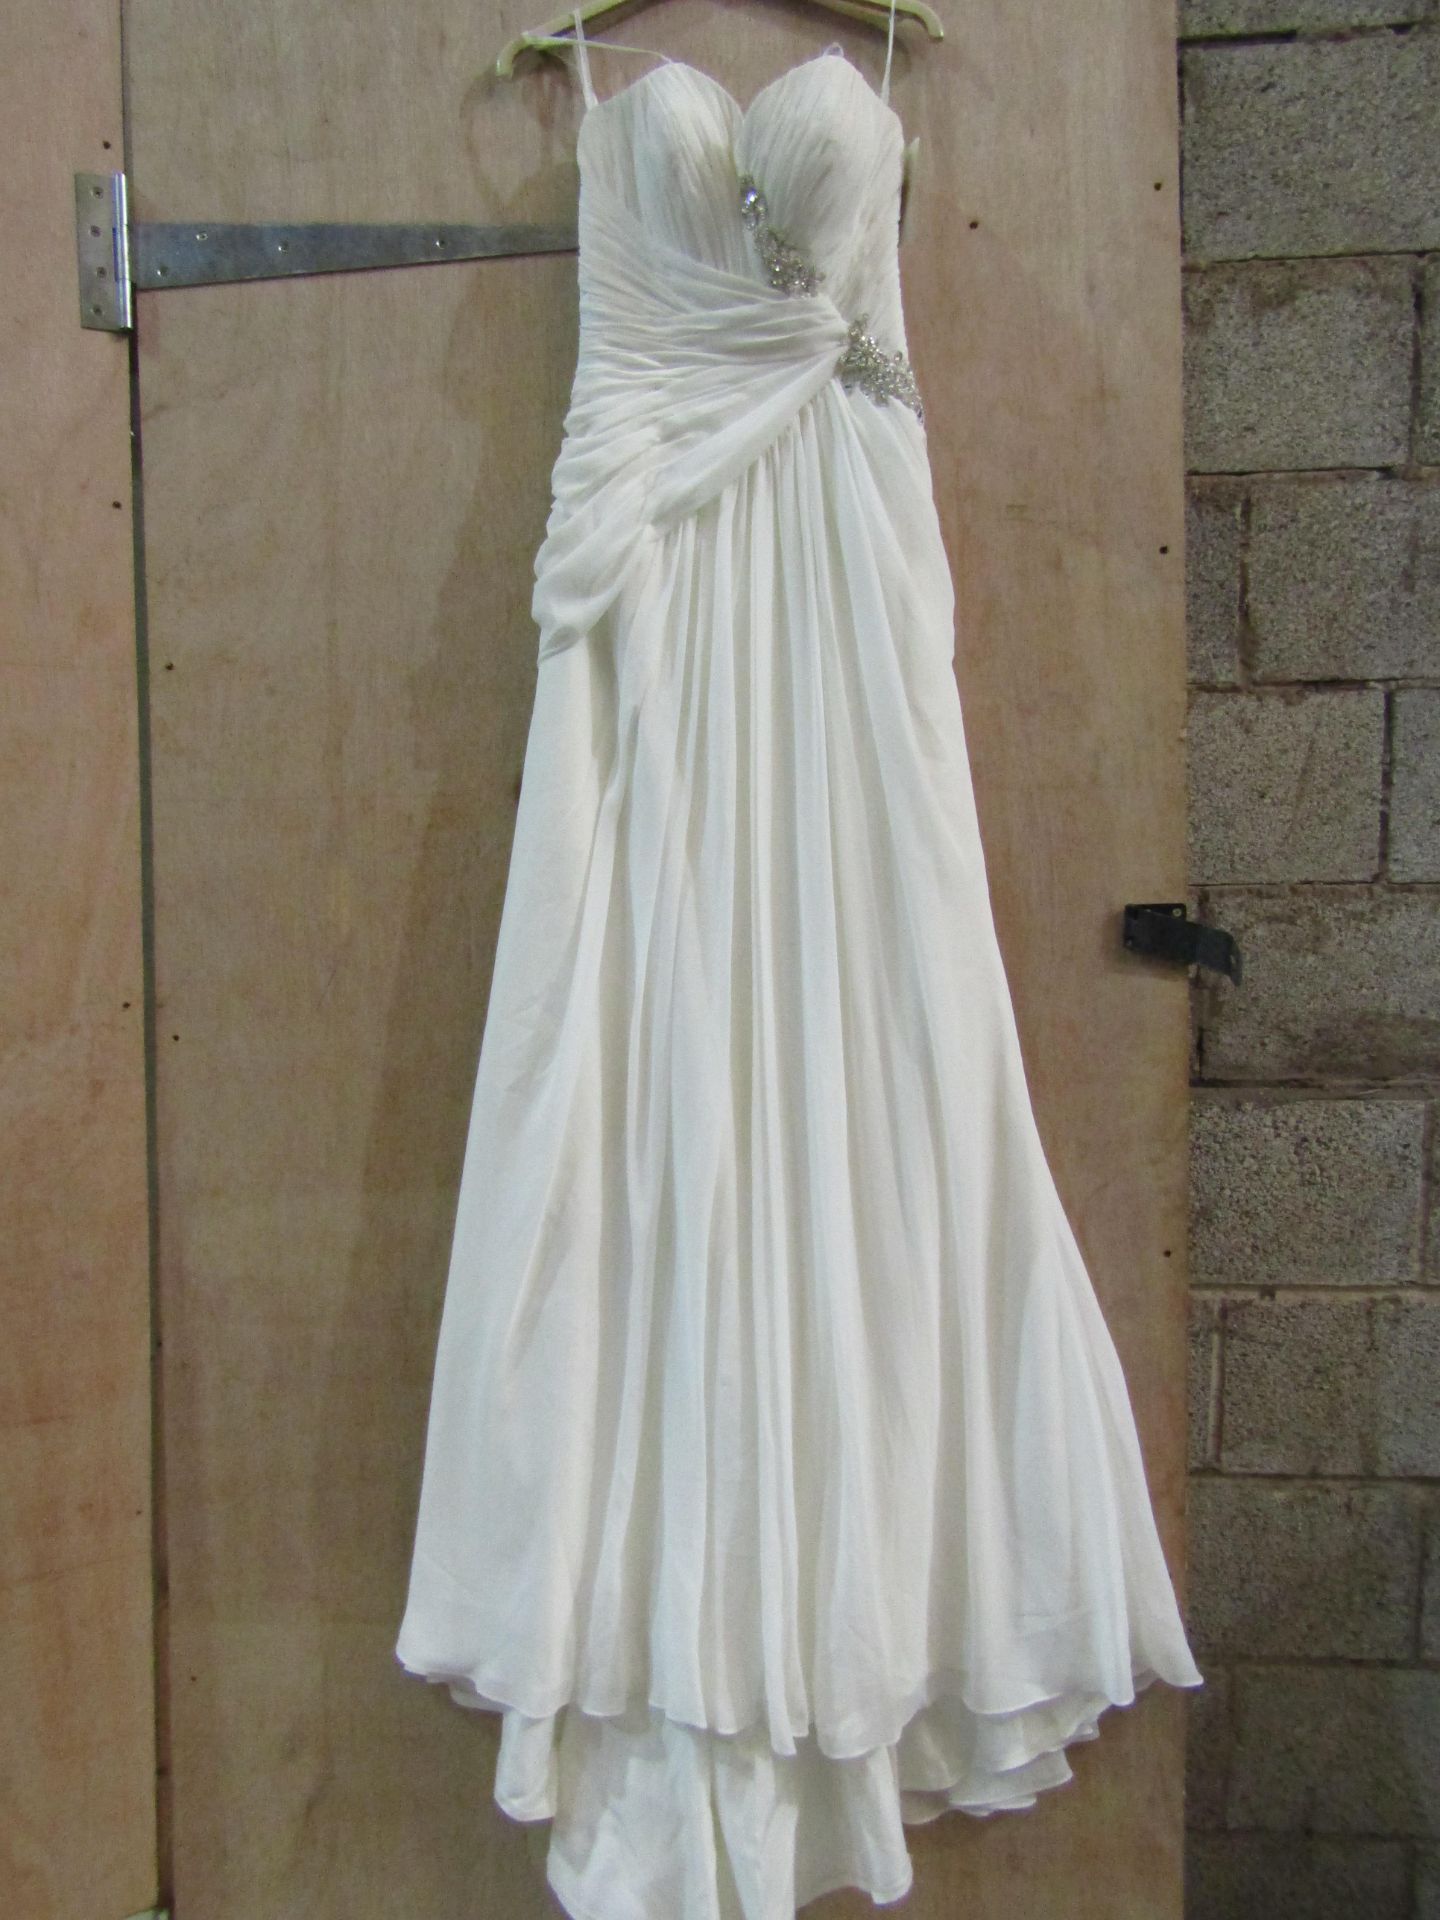 Approx 500 pieces of wedding shop stock to include wedding dresses, mother of the bride, dresses, - Image 95 of 108